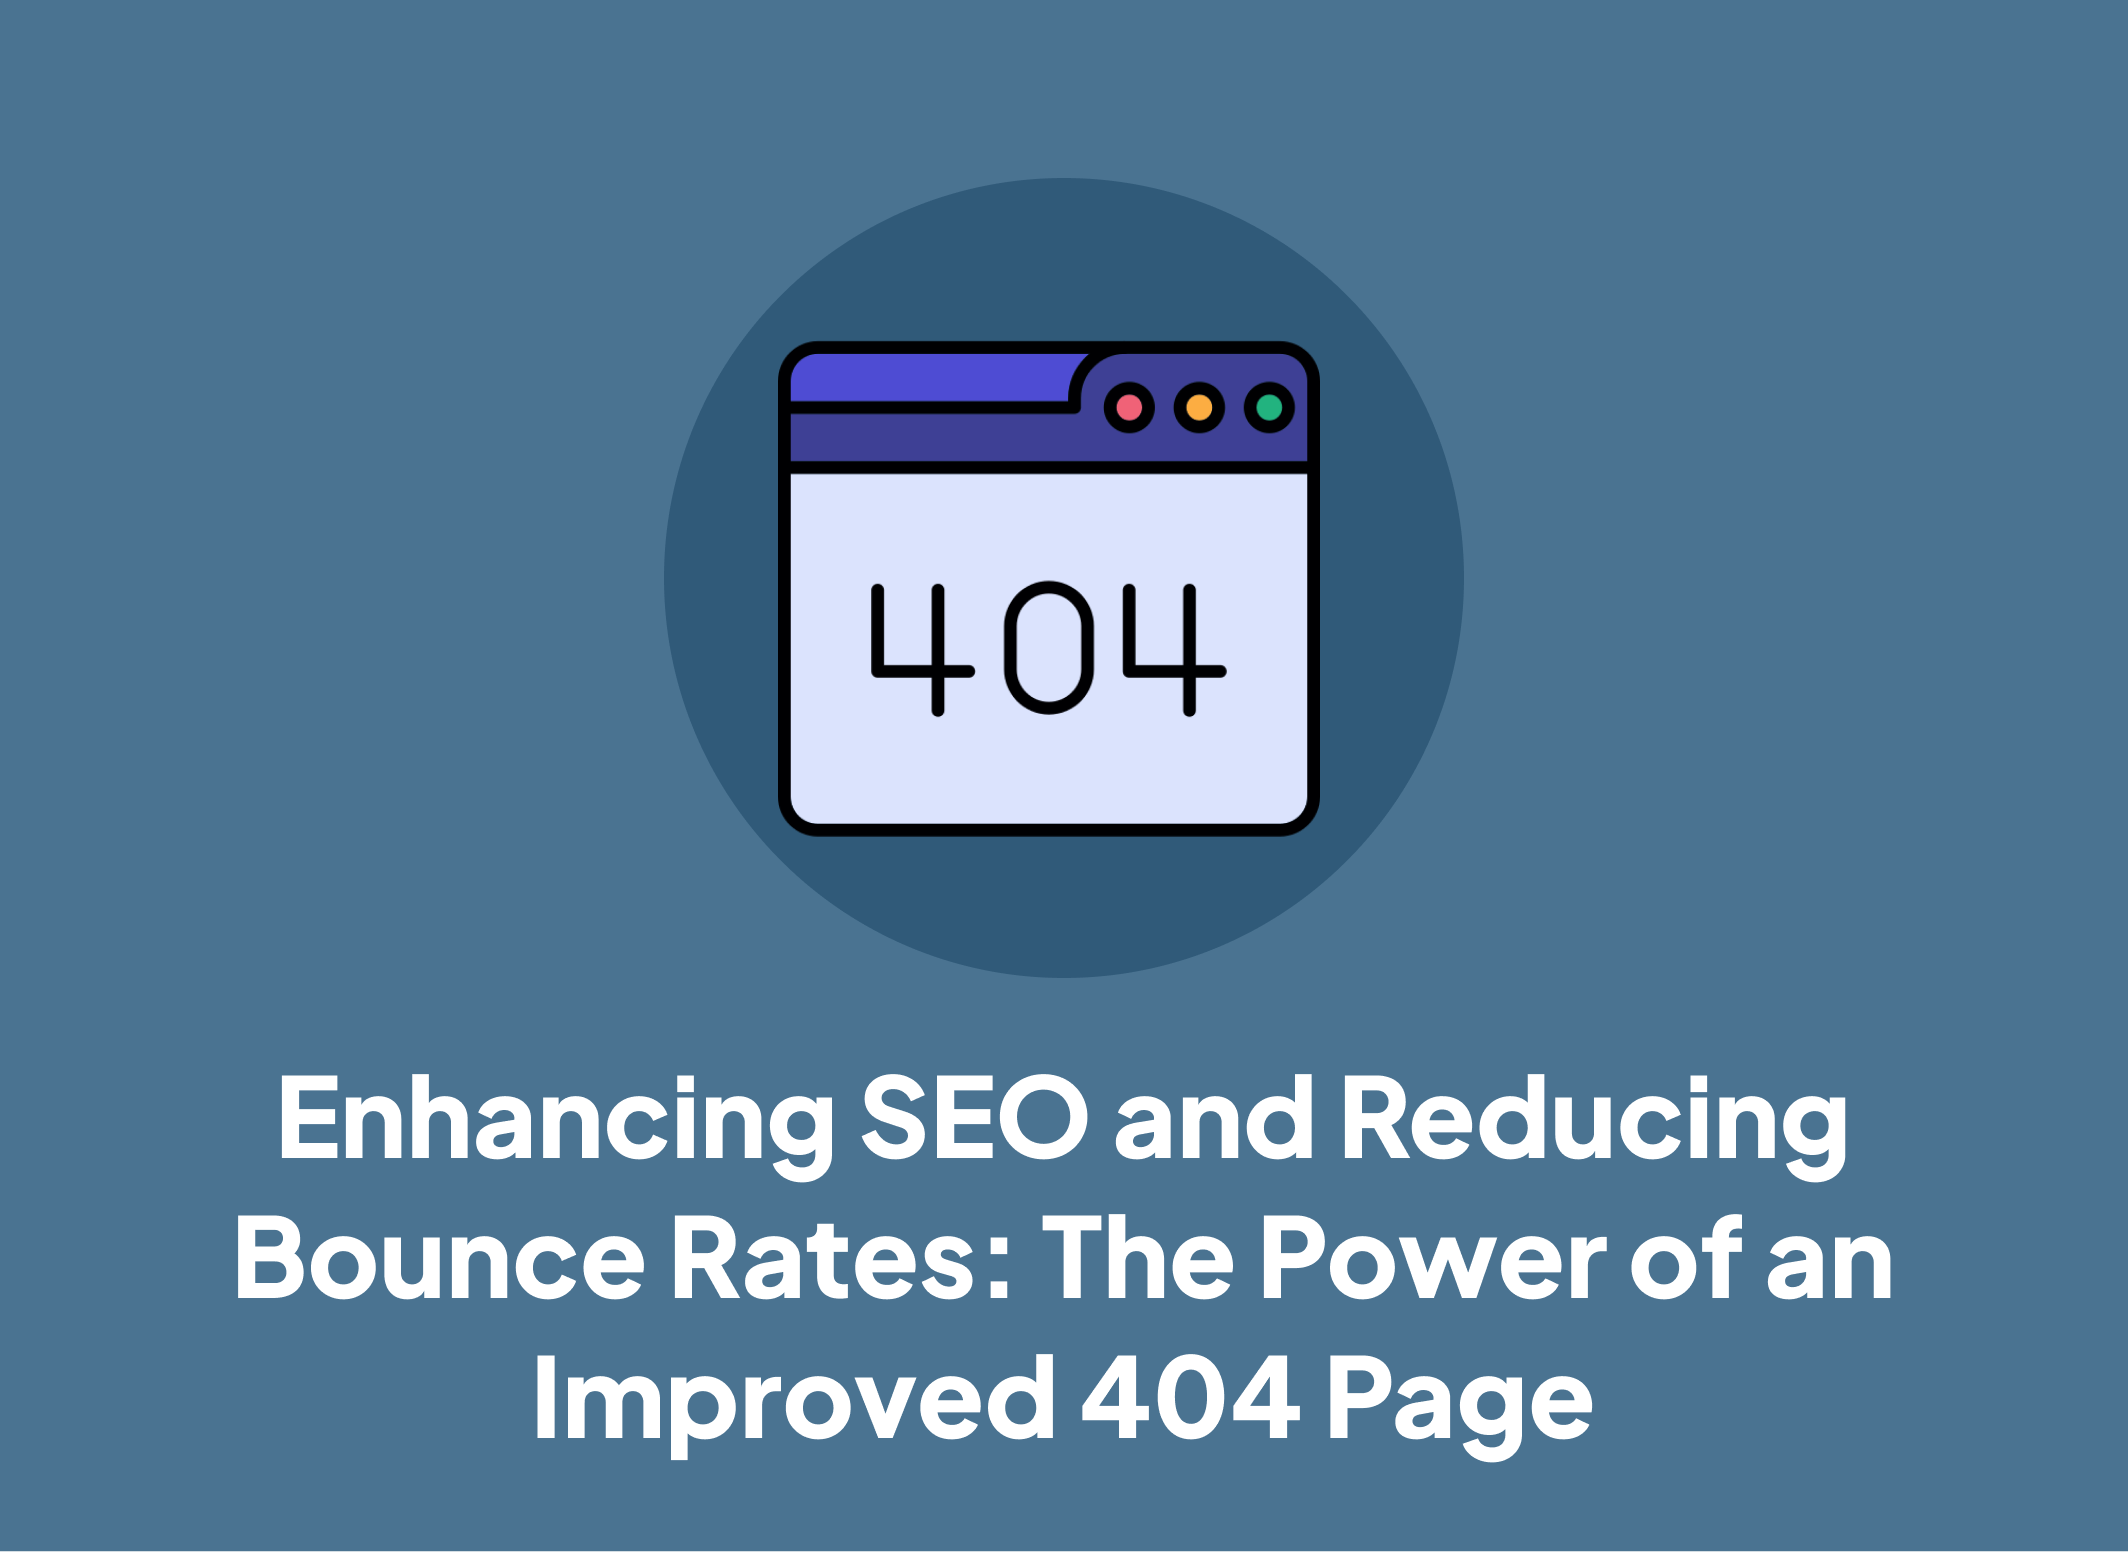 Enhancing SEO and Reducing Bounce Rates: The Power of an Improved 404 Page